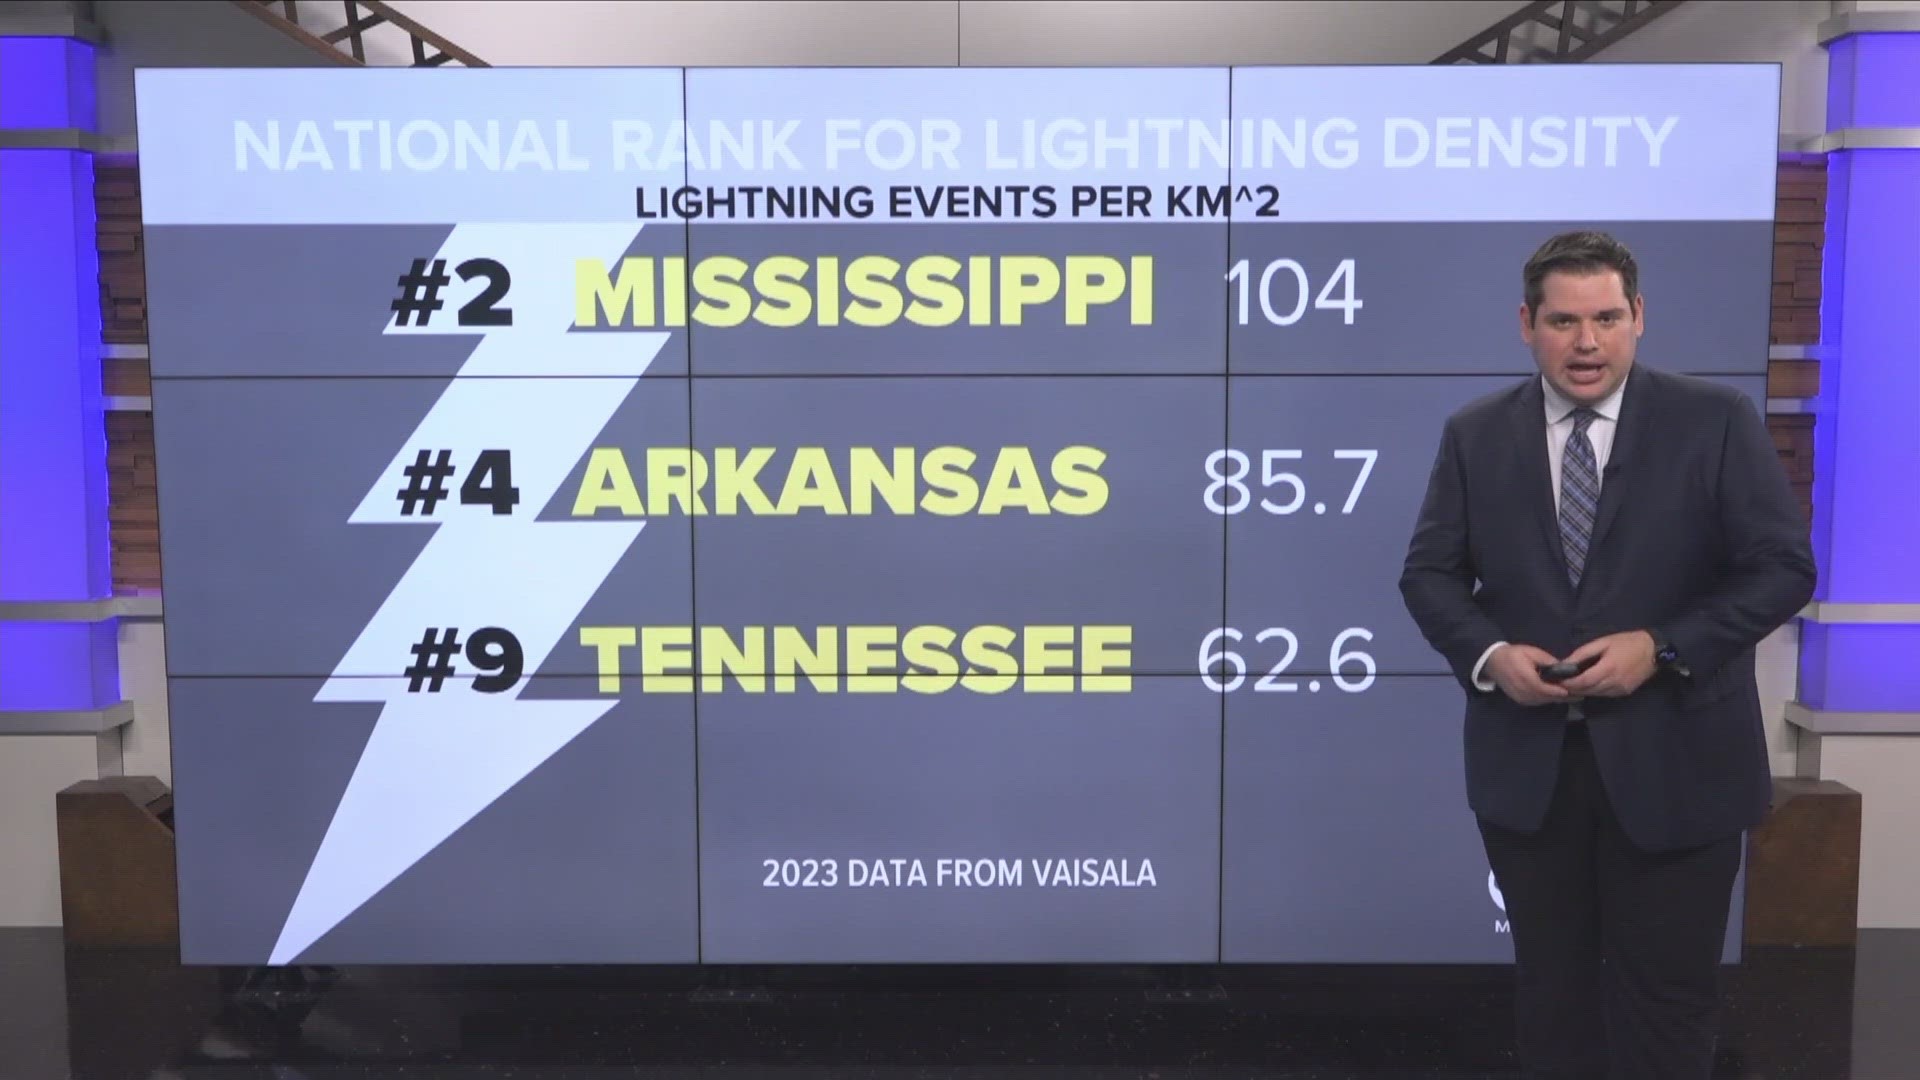 ABC24 Meteorologist Cory Smith takes a look at just how much lightning the Mid-South sees during rainy weather.